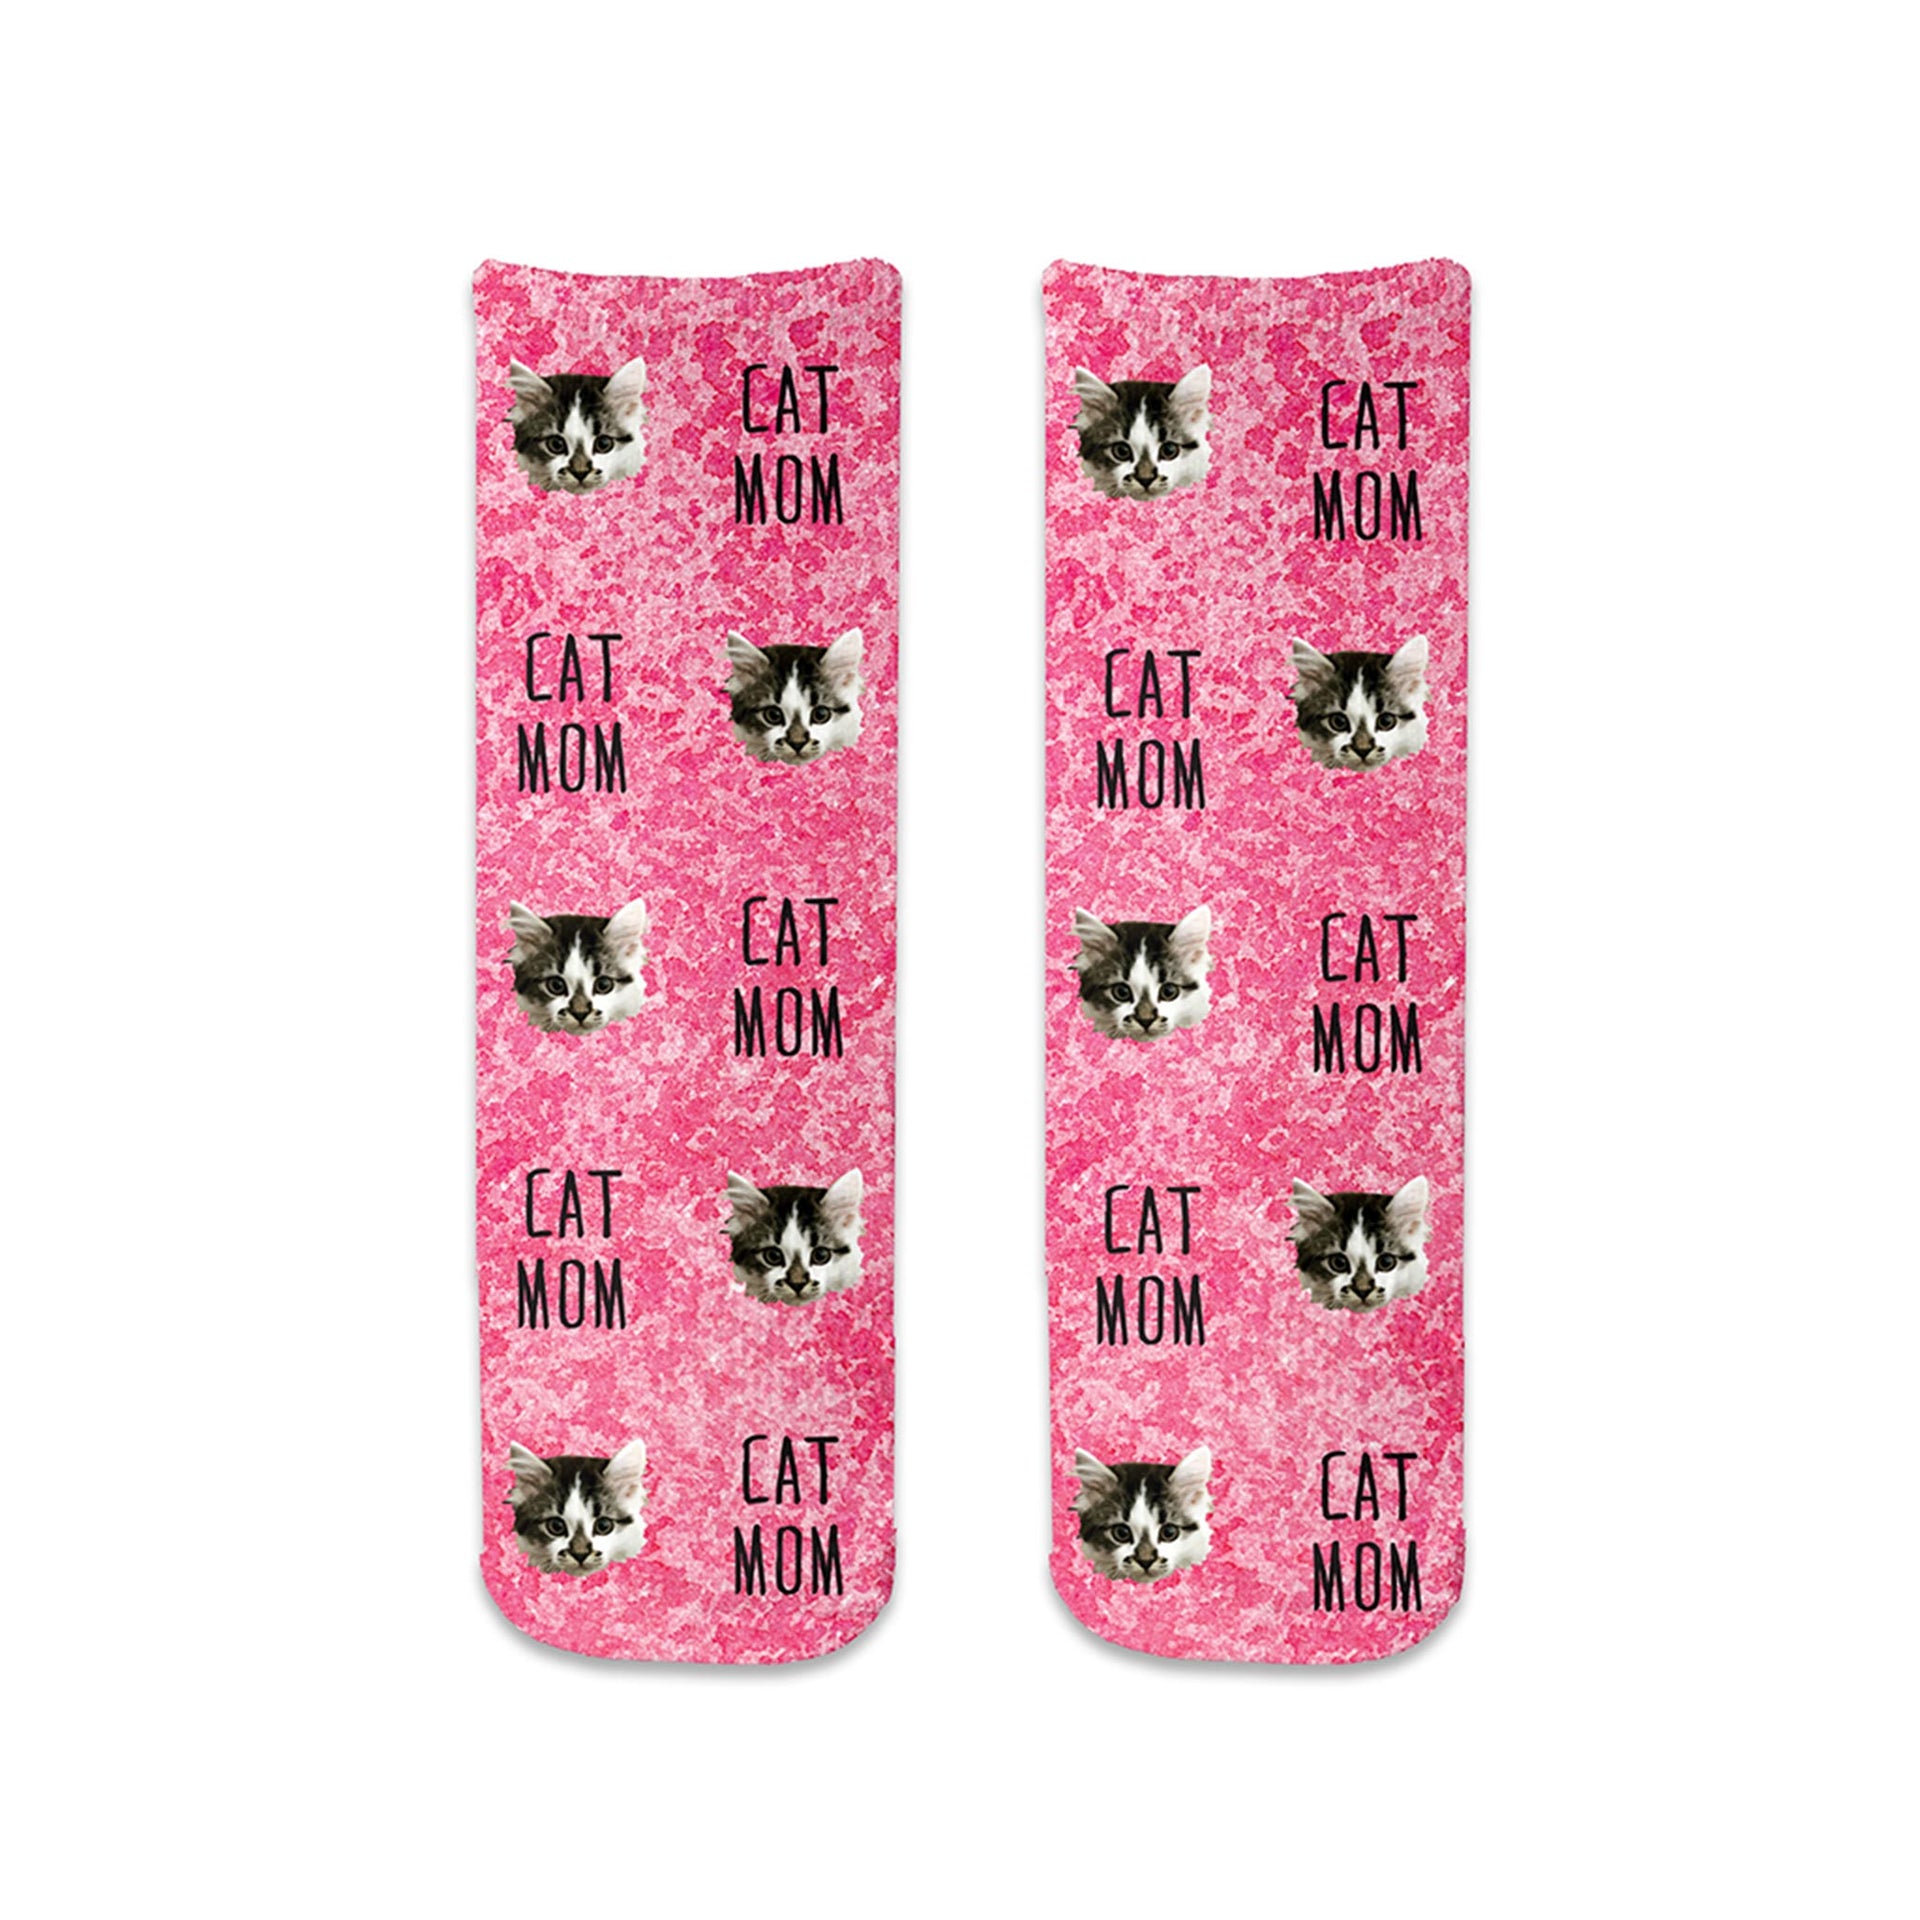 Cat mom design custom printed with pink speckle background and personalized using your own photo face on short cotton crew socks makes a great way to show support for breast cancer awareness.